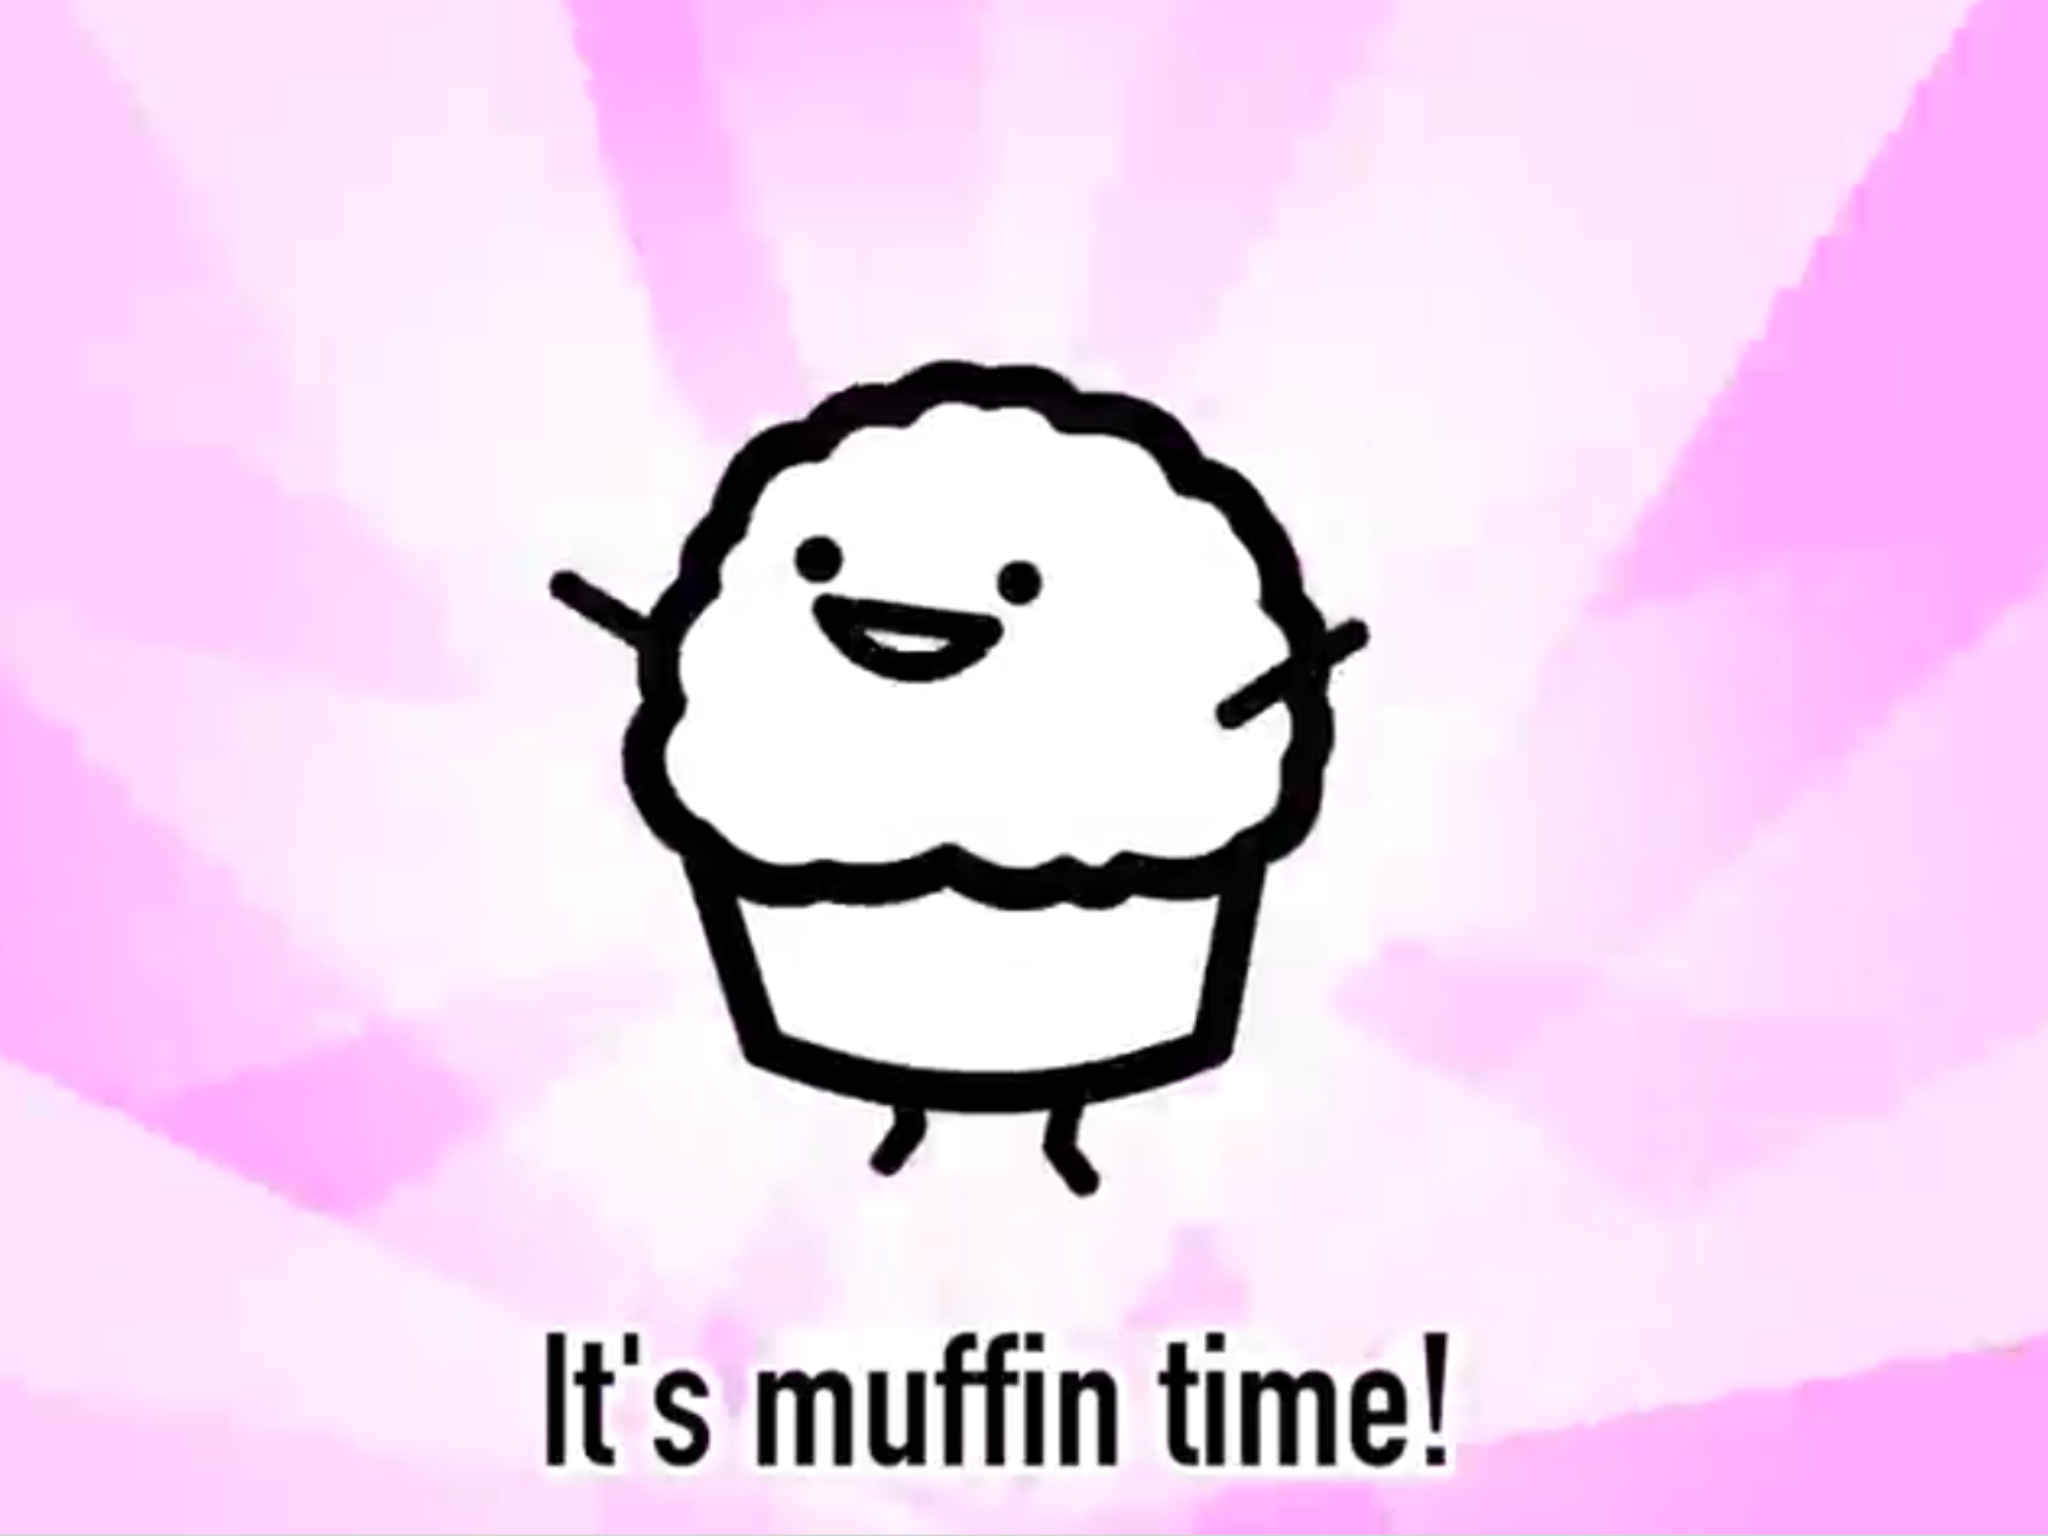 ASDF Its Muffin Time remix on youtube Audreys Pinterest